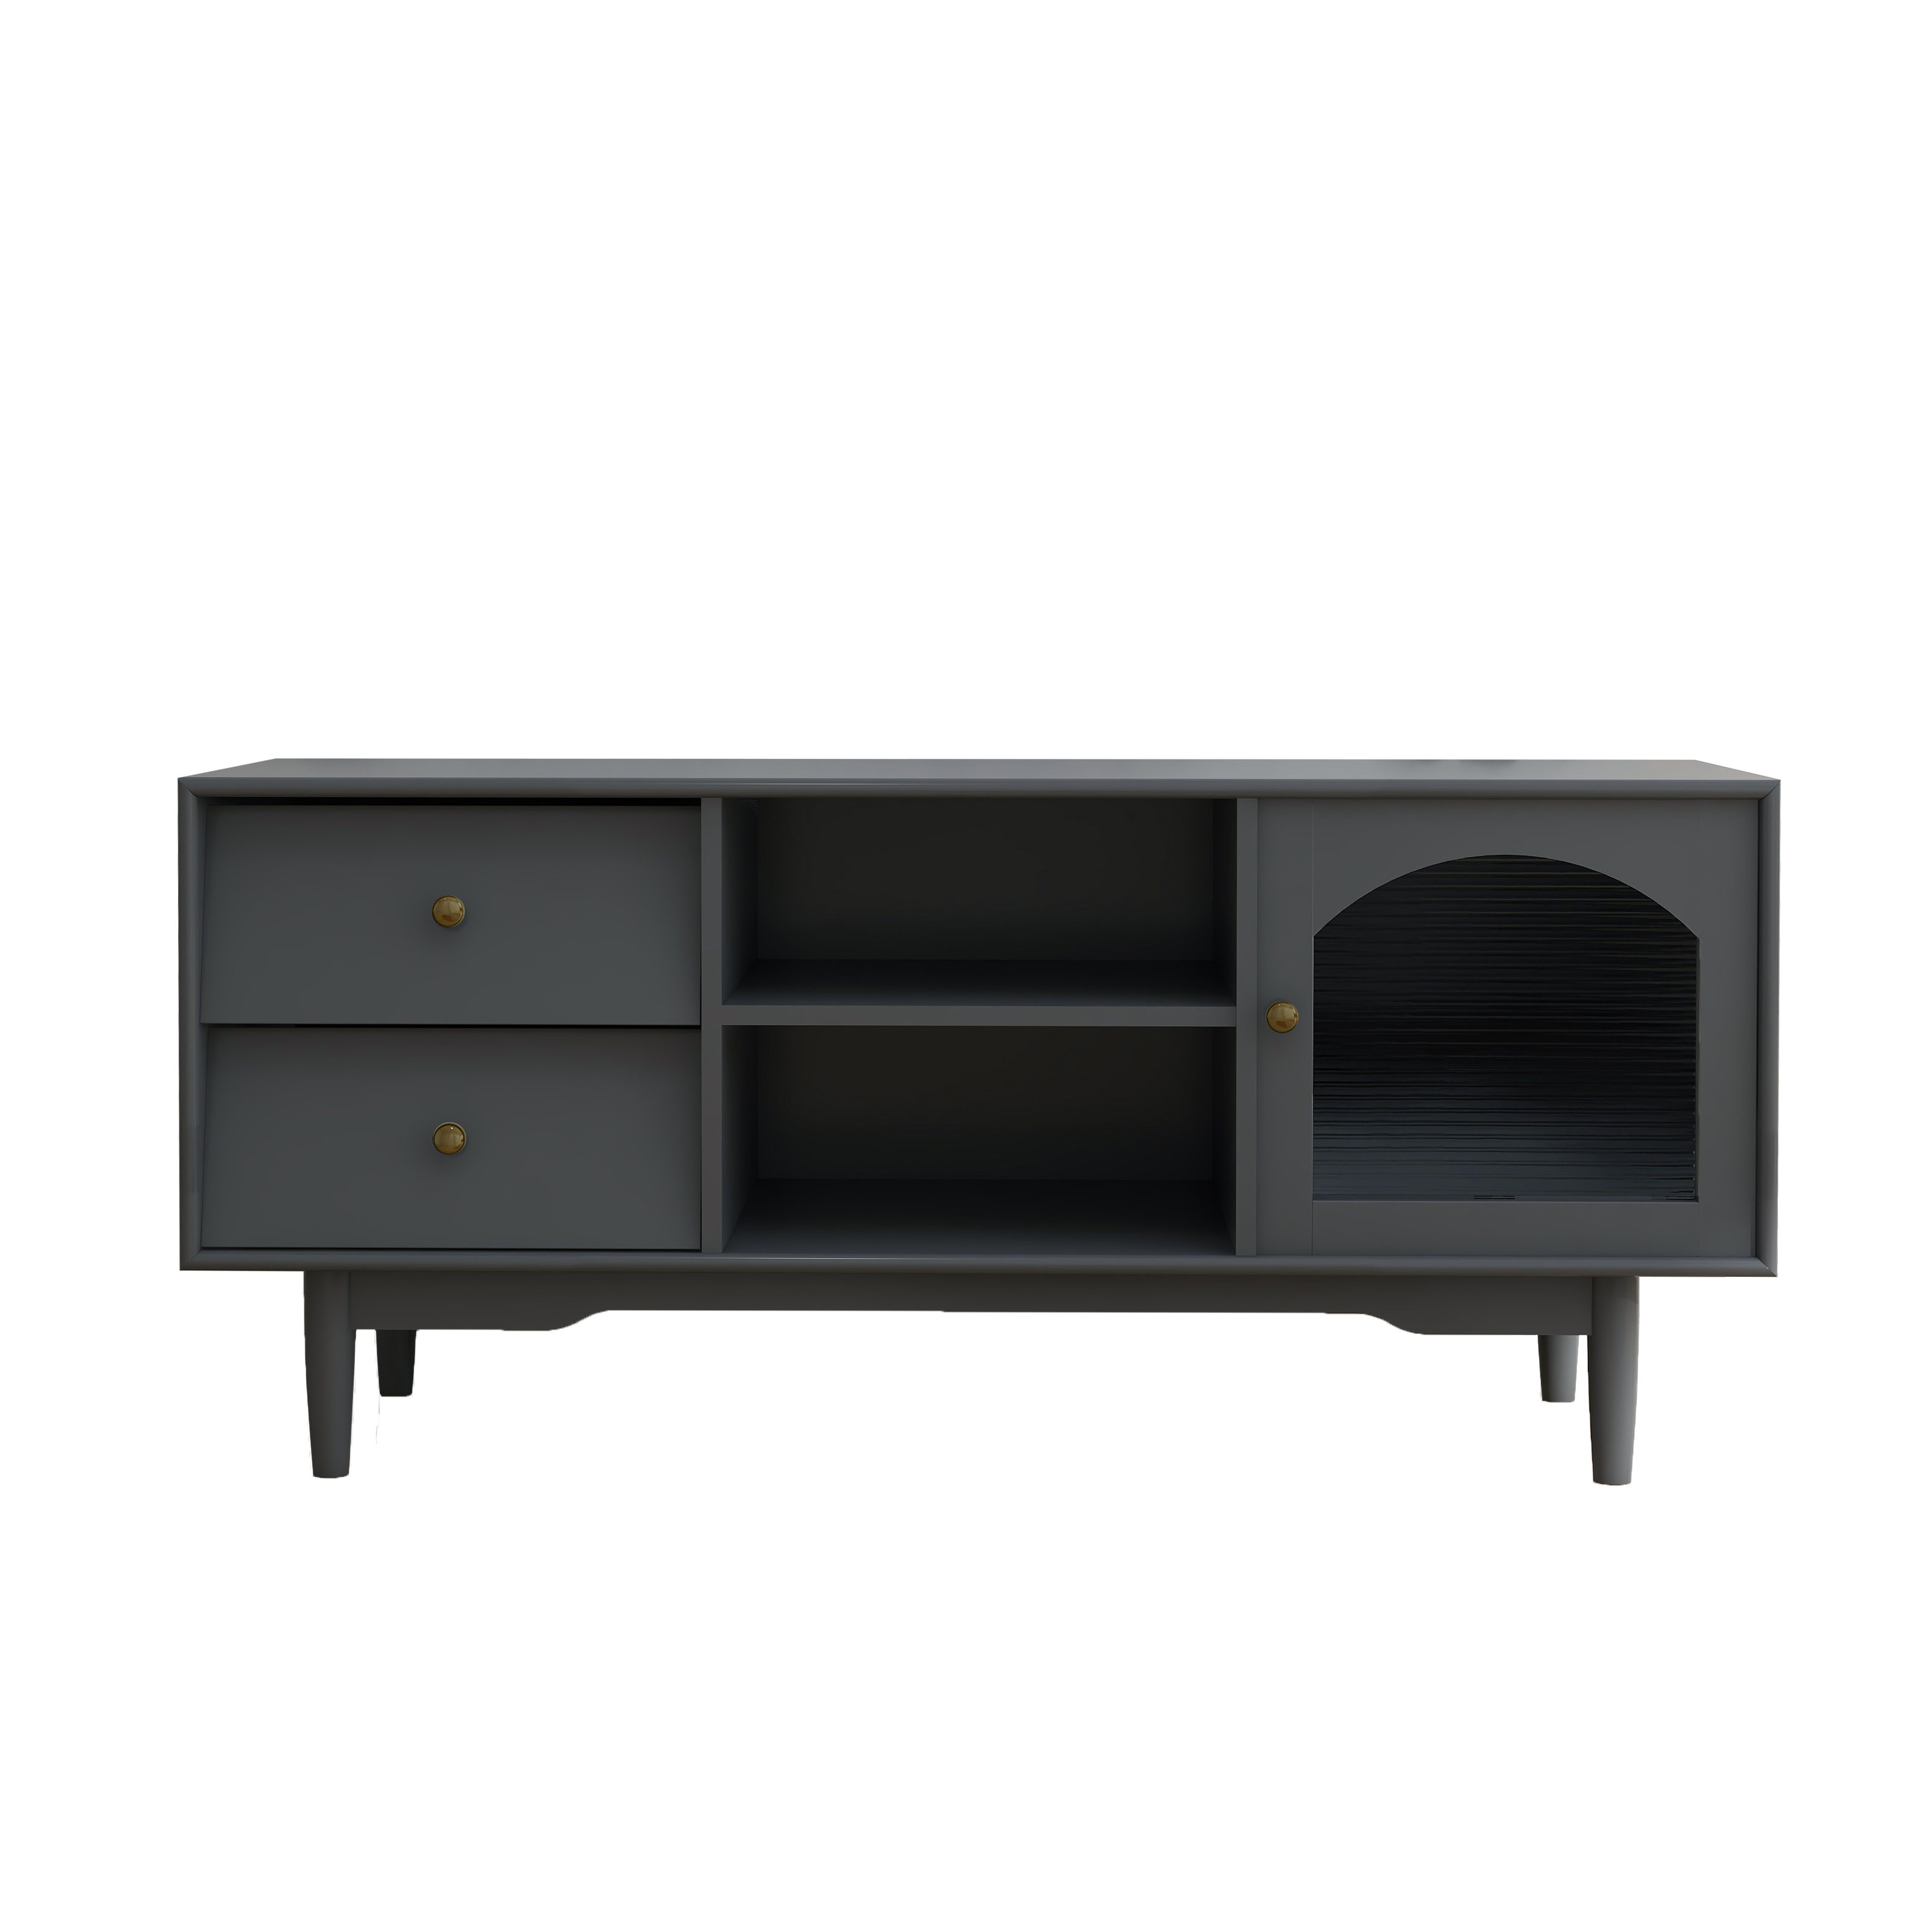 Living Room Grey color Tv cabinet with Drawers and open shelf, one cabinet storage space with glass door-CASAINC